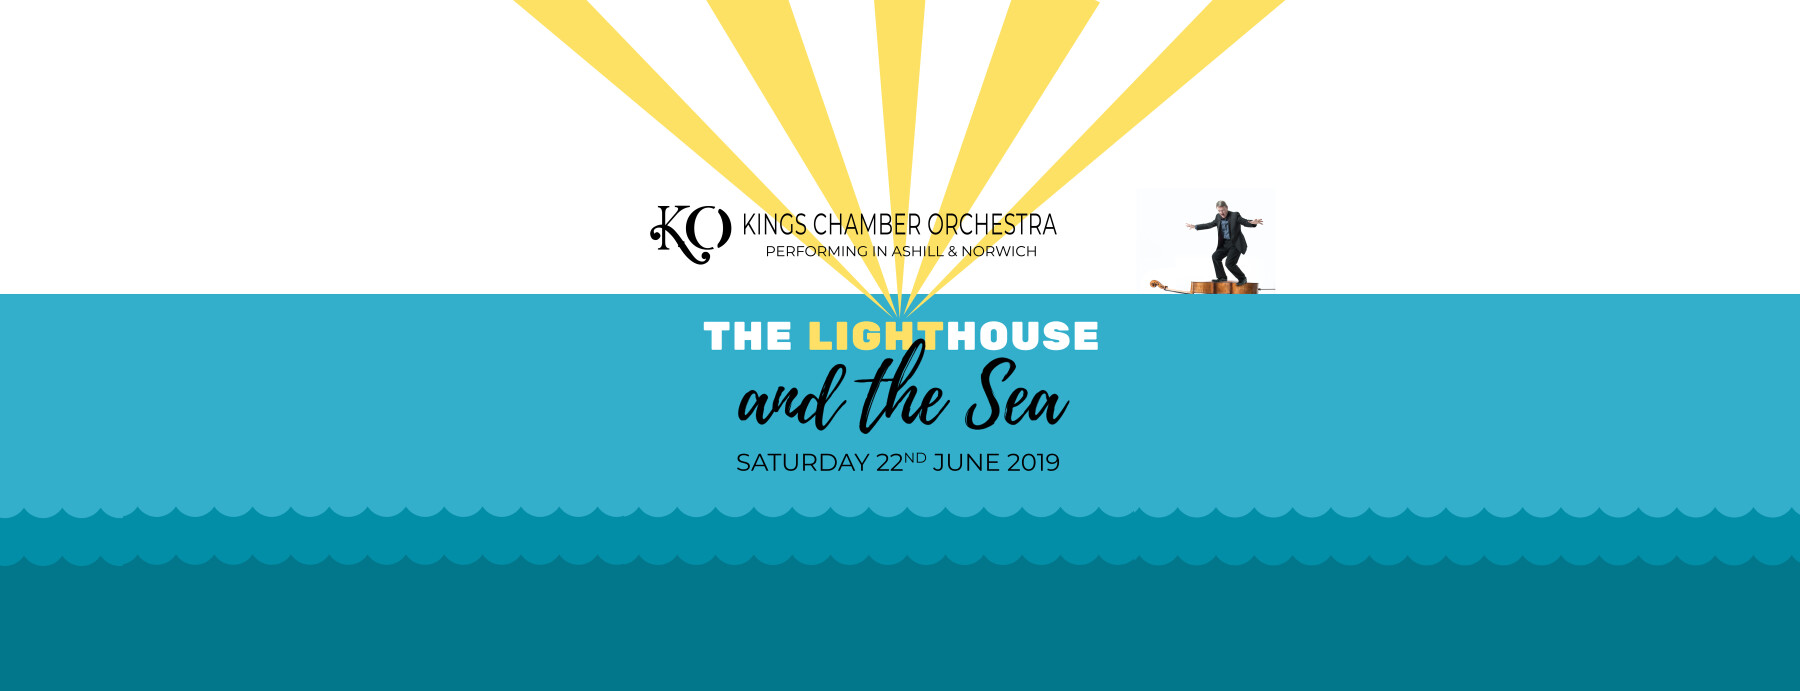 Kings Chamber Orchestra